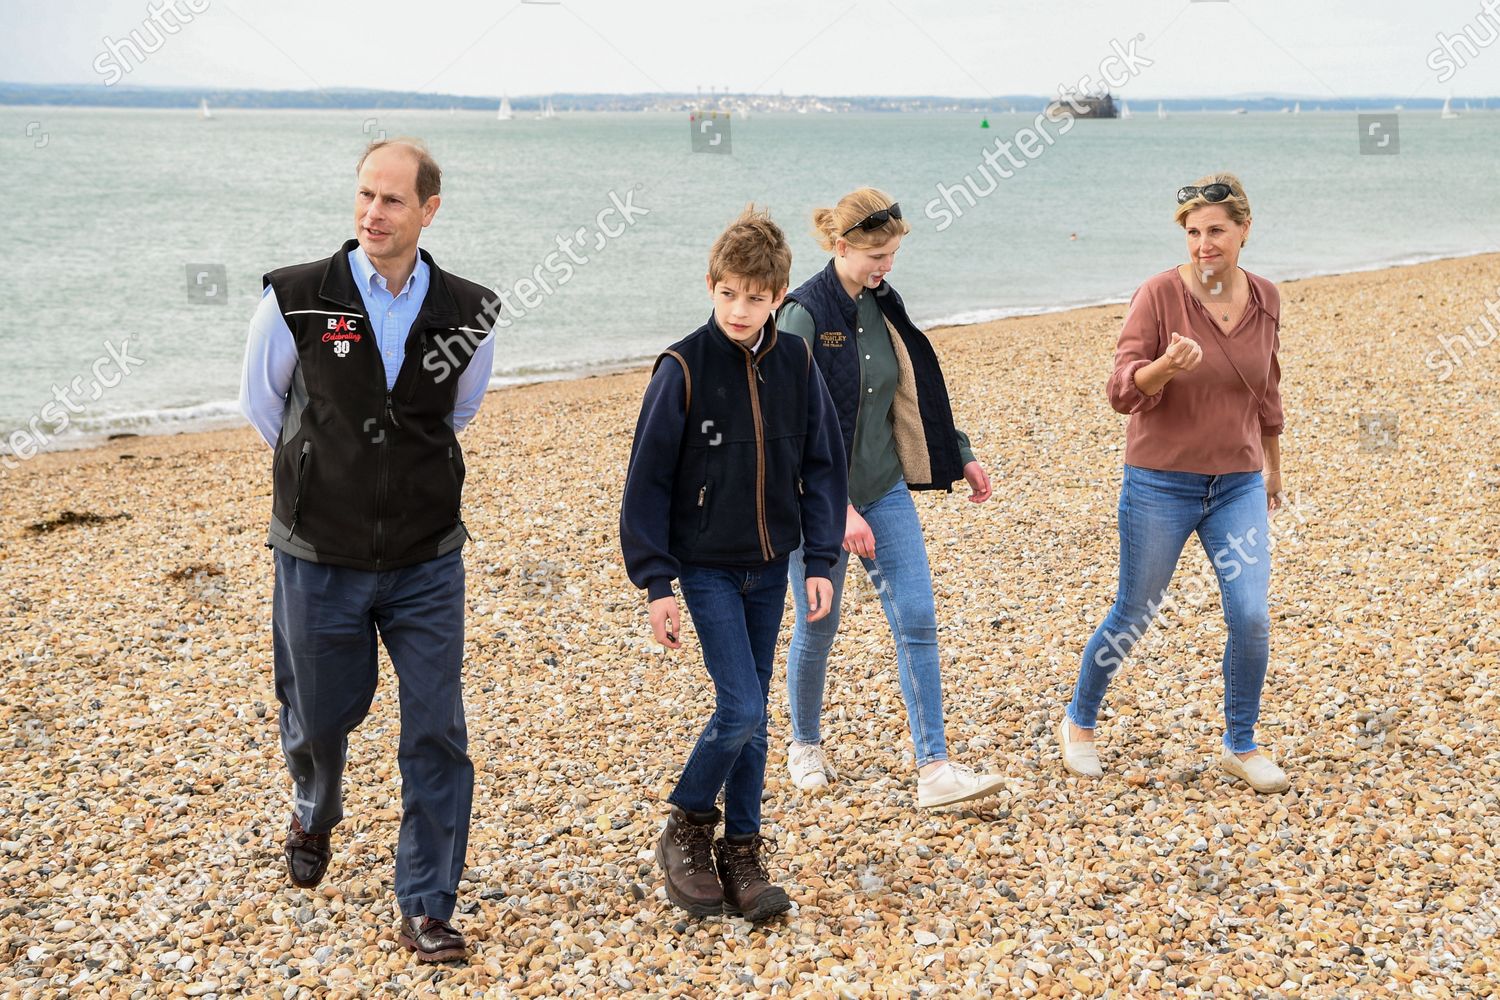 prince-edward-and-sophie-countess-of-wessex-great-british-beach-clean-southsea-beach-portsmouth-uk-shutterstock-editorial-10782998aq.jpg